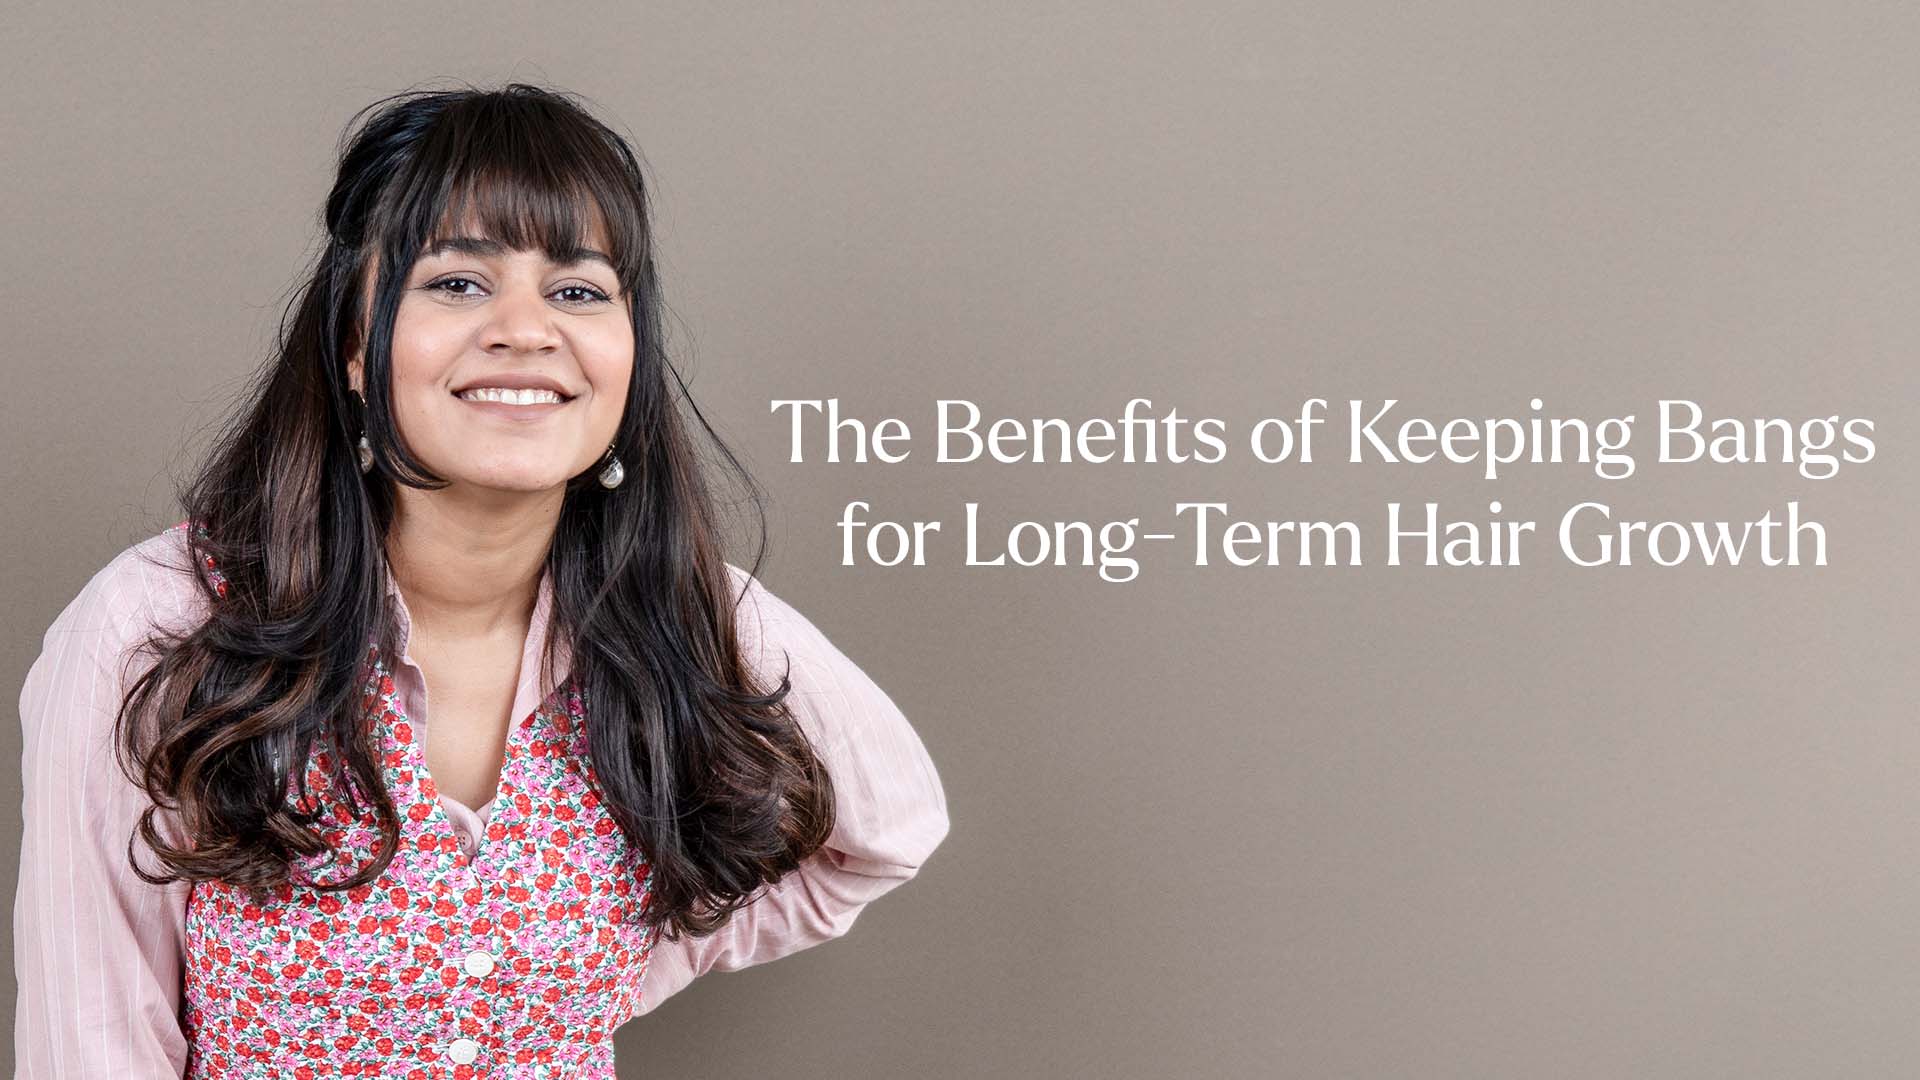 The Benefits of Keeping Bangs for Long-Term Hair Growth